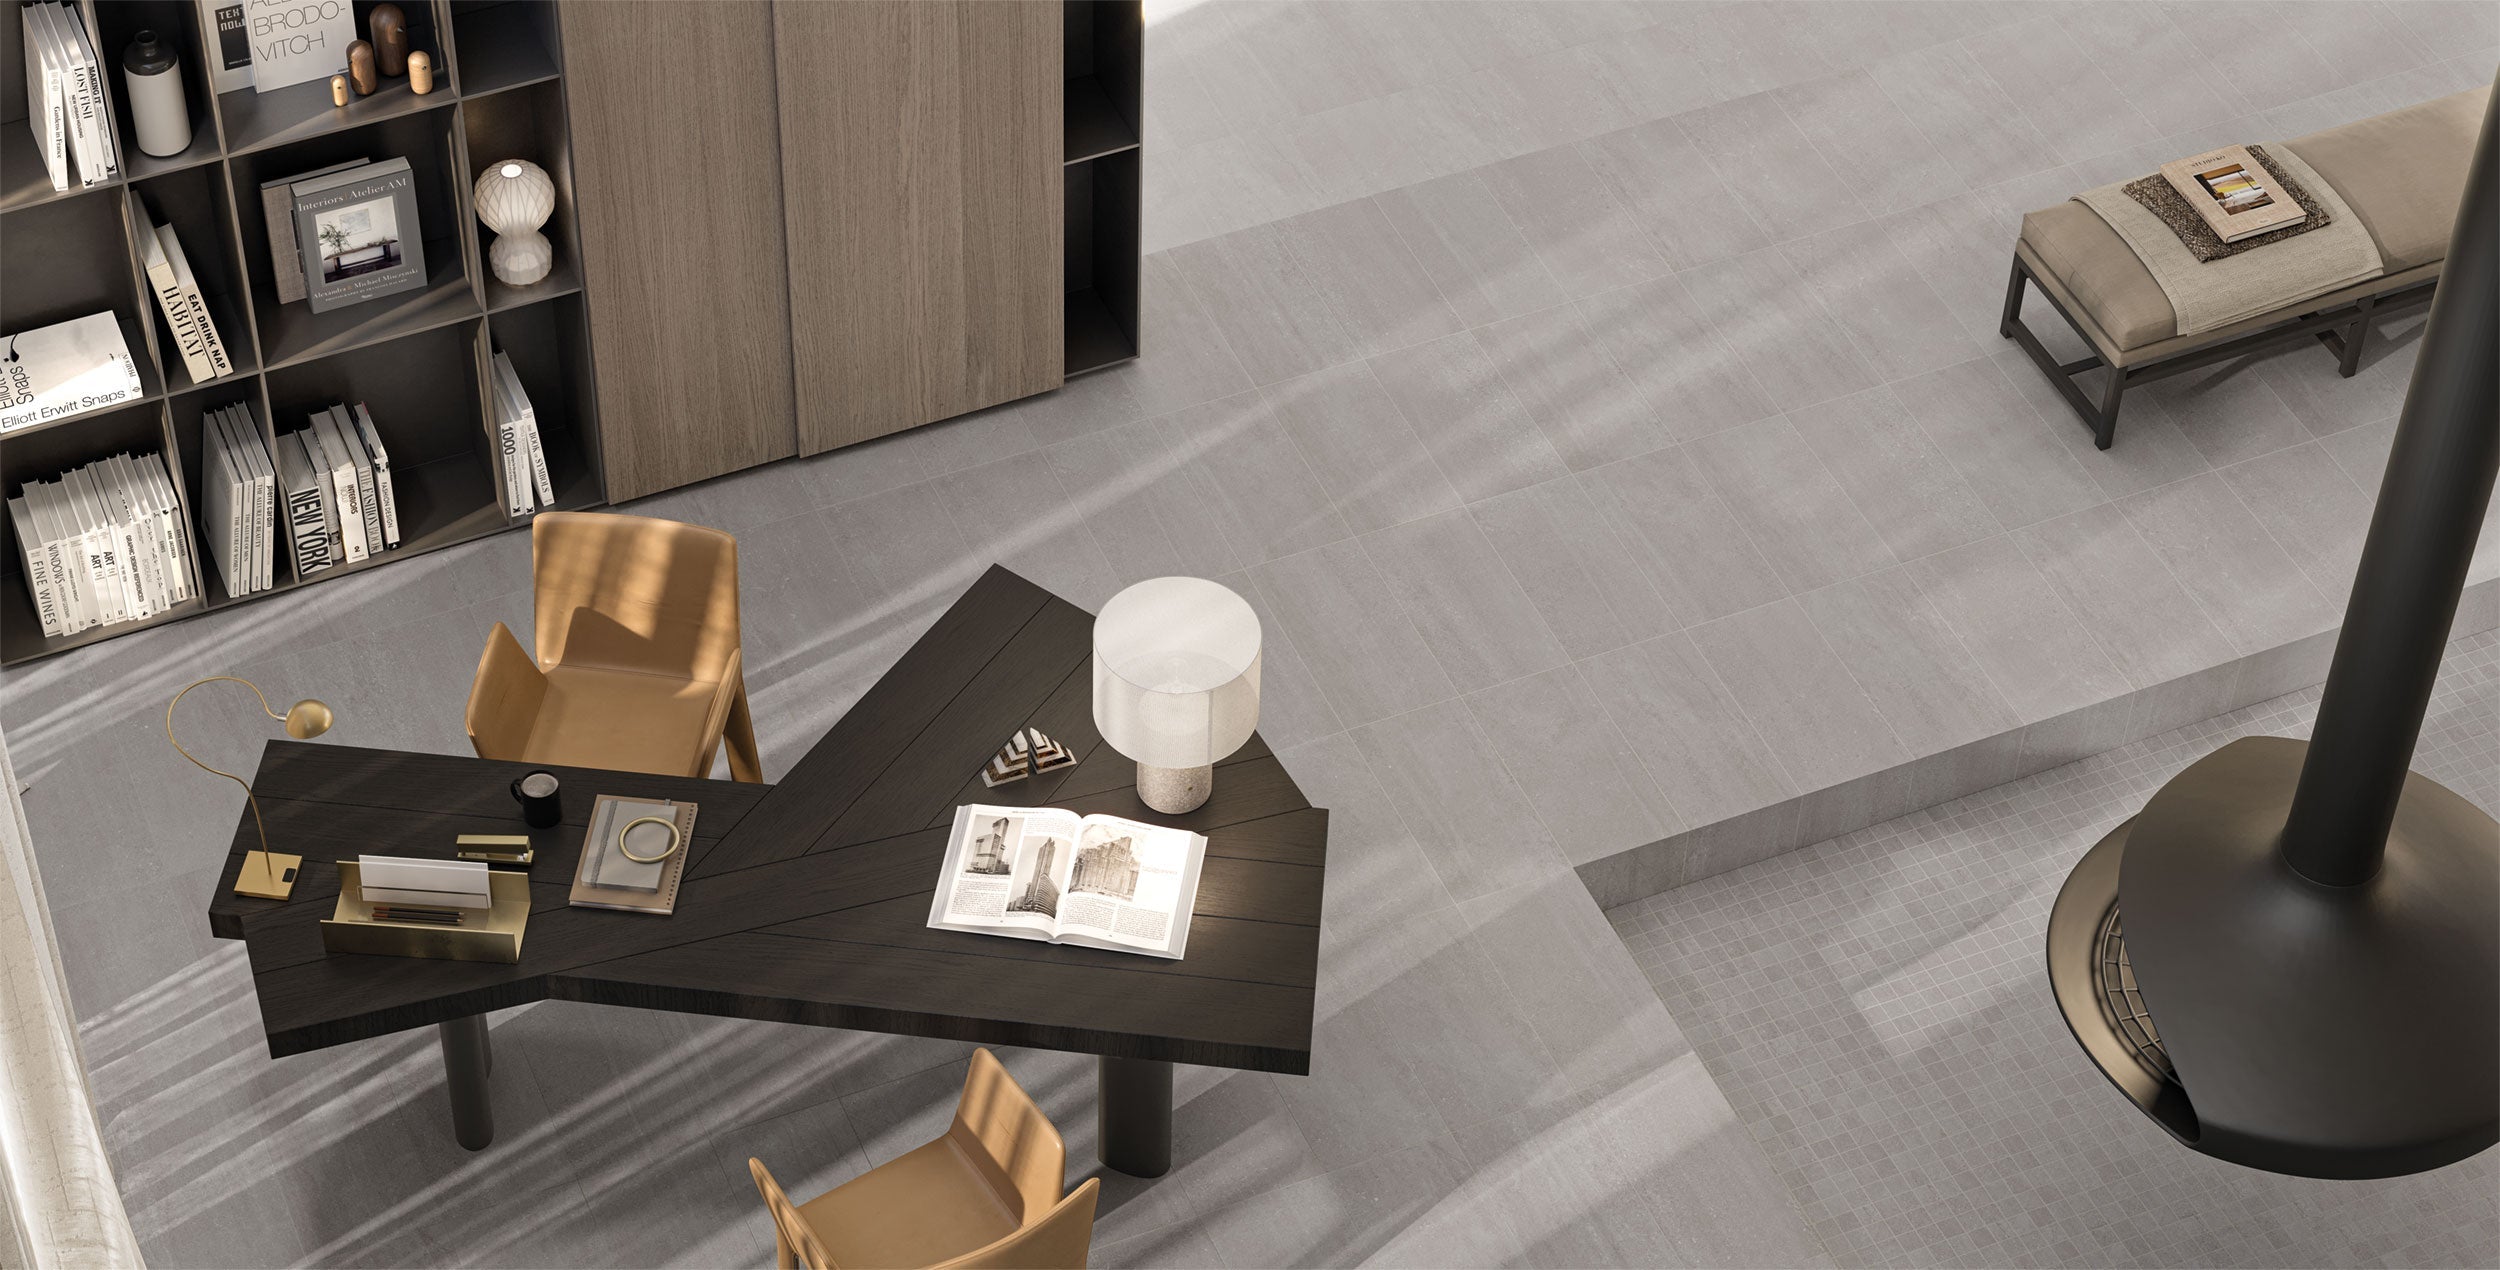 Elegant Brooklyn porcelain tile collection by Surface Group showcased in a modern living room setting with stylish furniture and decor.